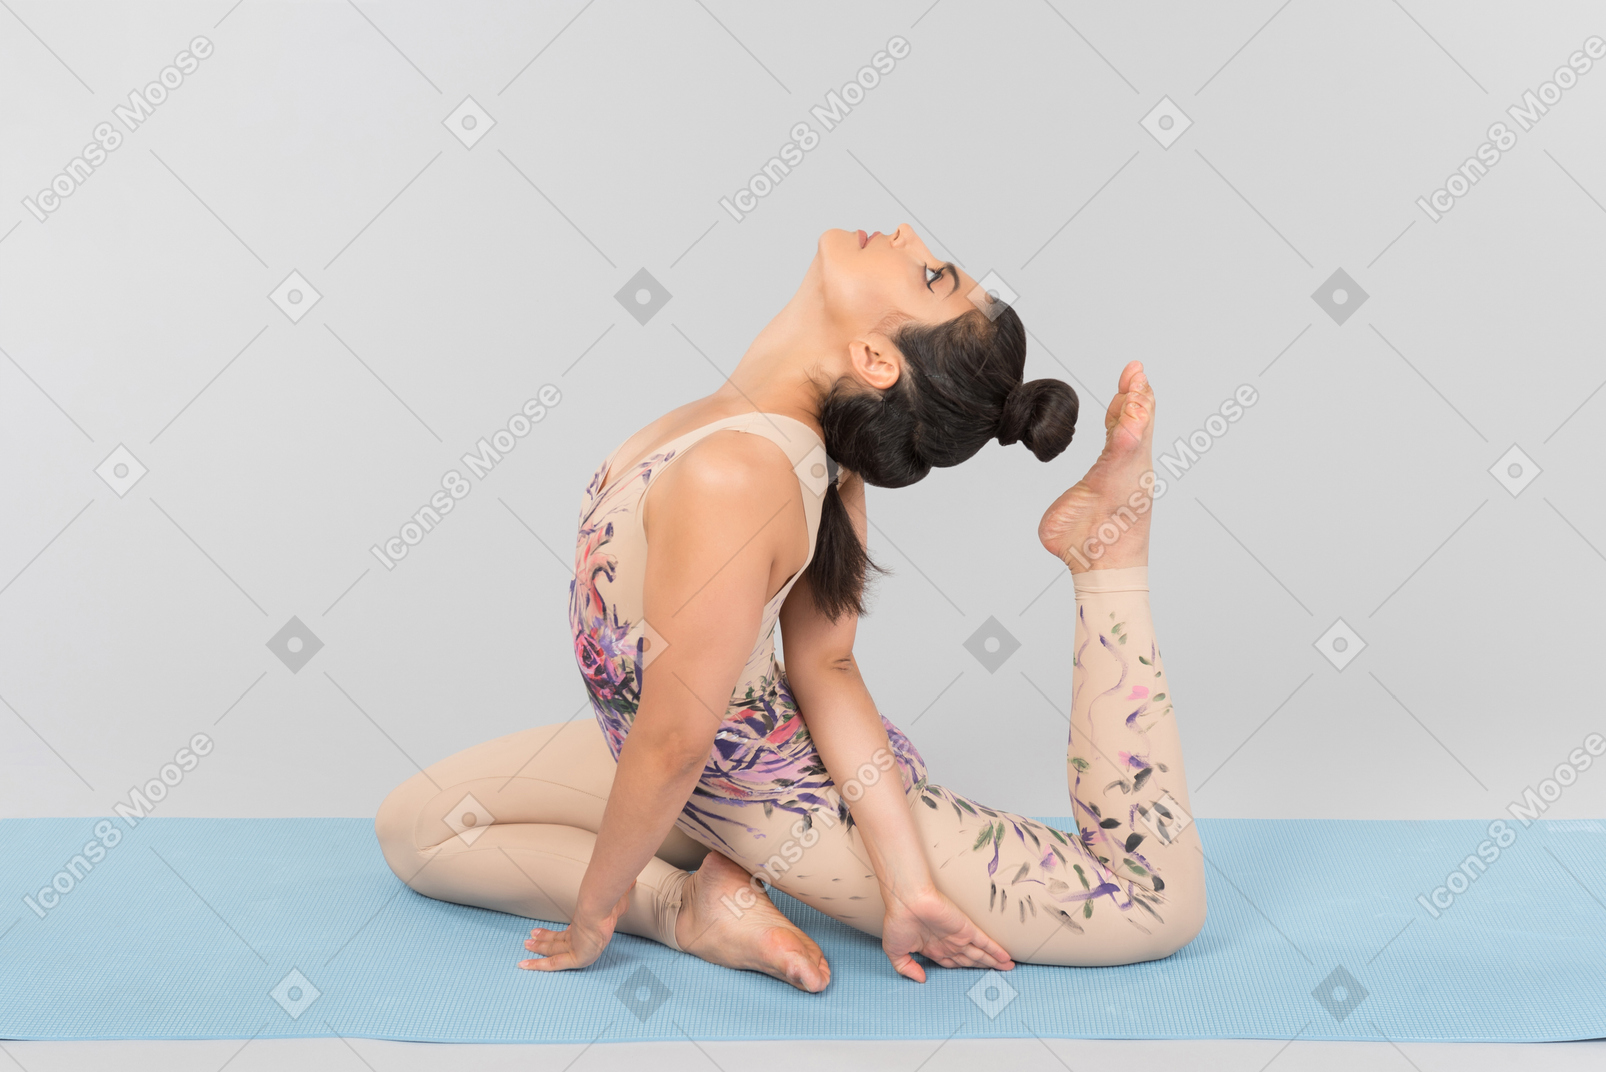 Young indian female gymnast lying on yoga mat and almost touching her head with a toe